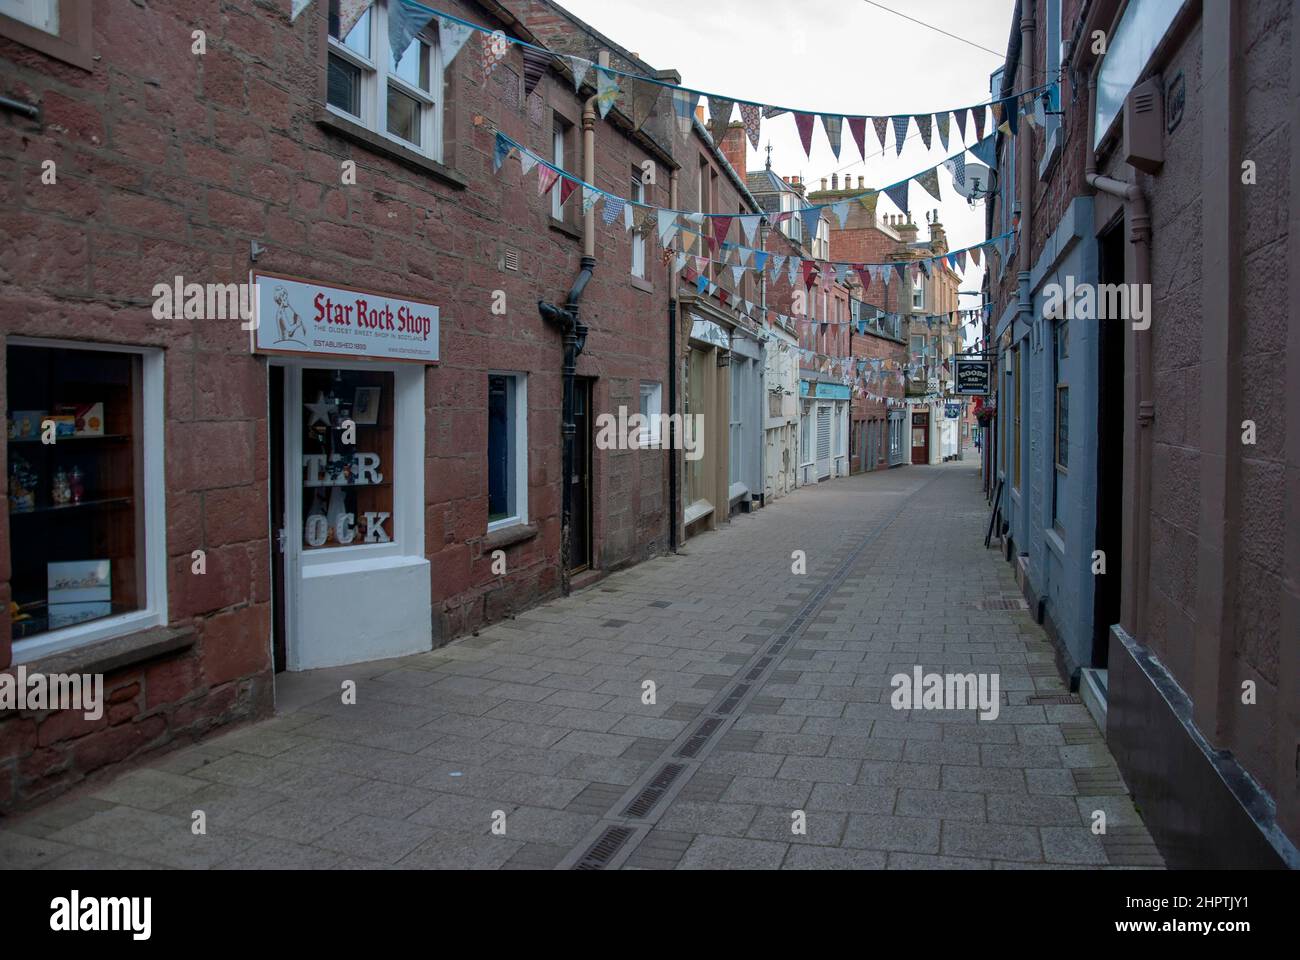 Streetscape Roods Shopping and Residential Street Kirriemuir Angus Scotland United Kingdom landscape view of deserted pedestrianised alley lane close Stock Photo